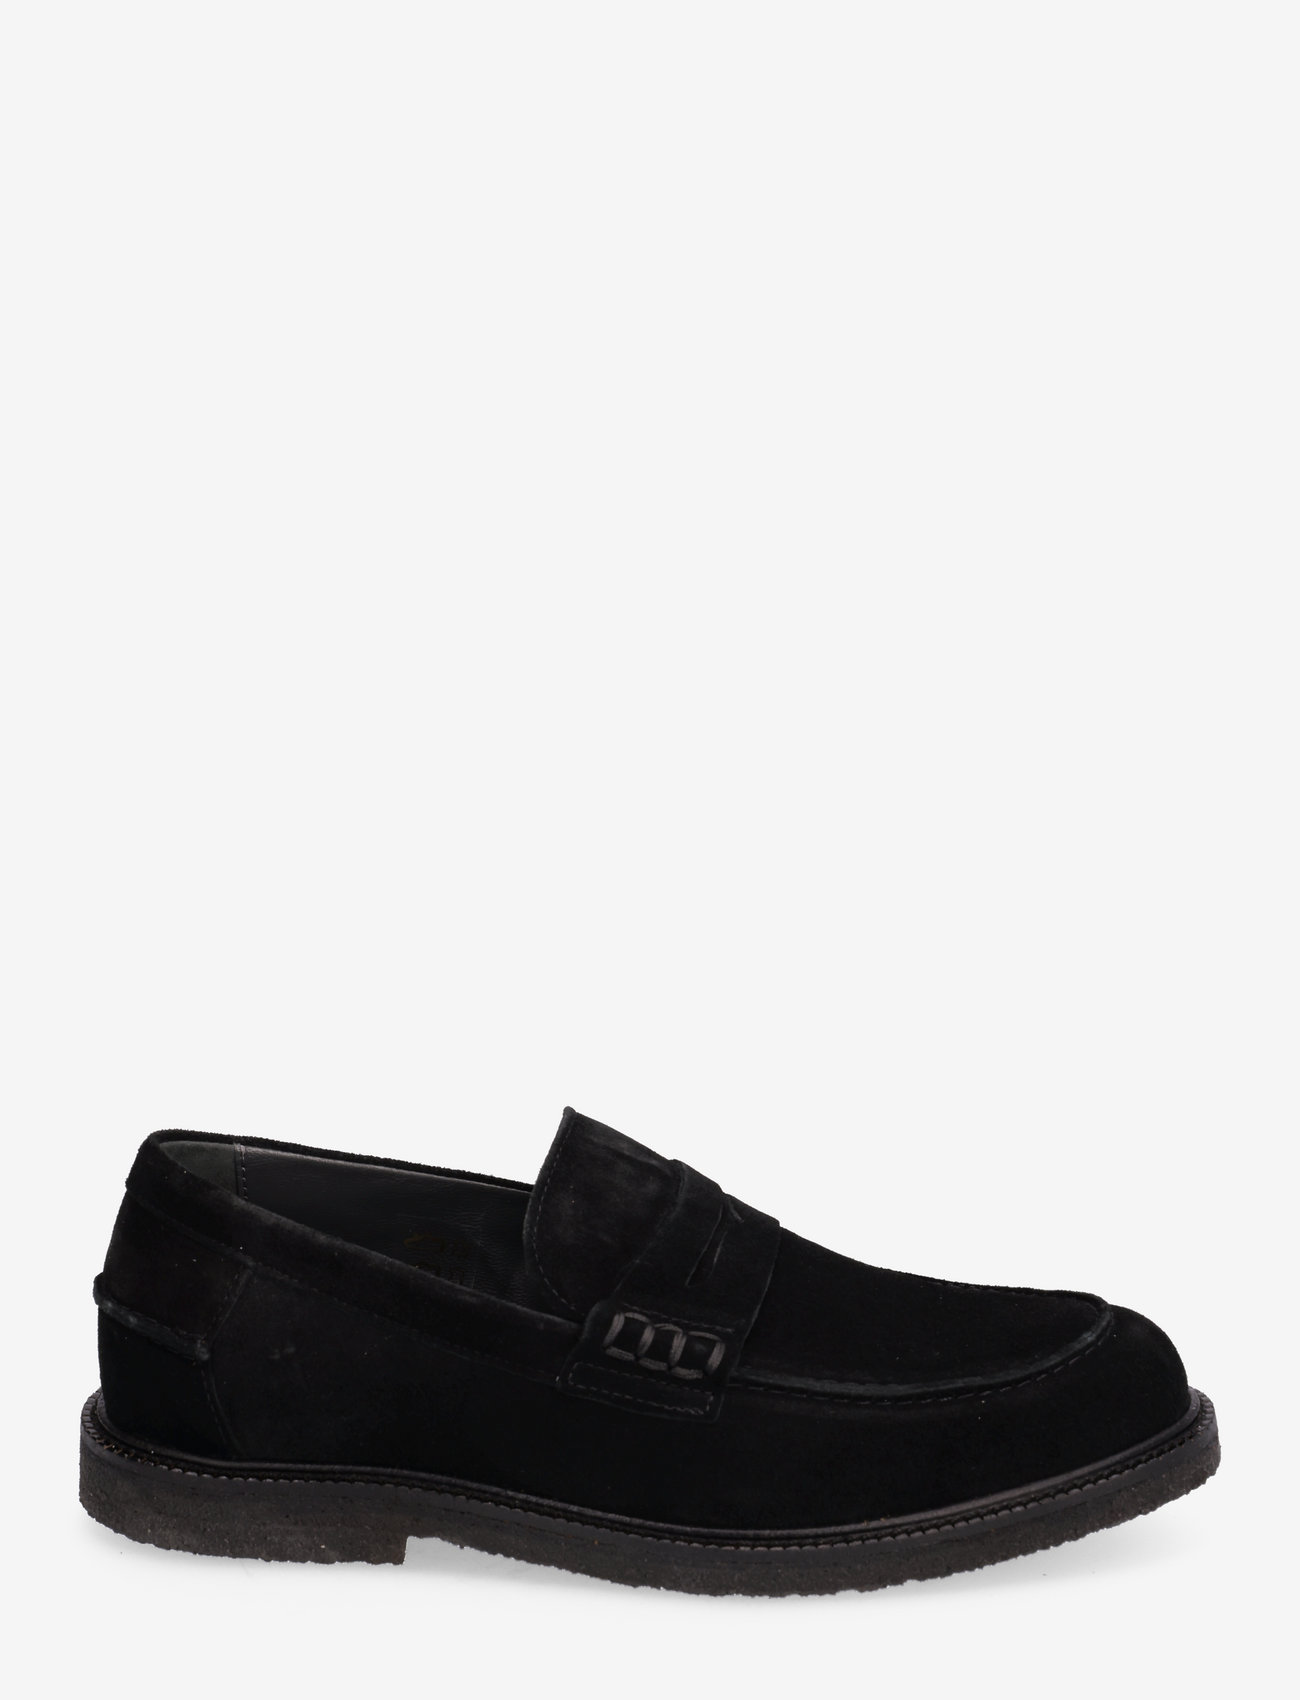 ANGULUS - Loafer - birthday gifts - 1163 black - 1